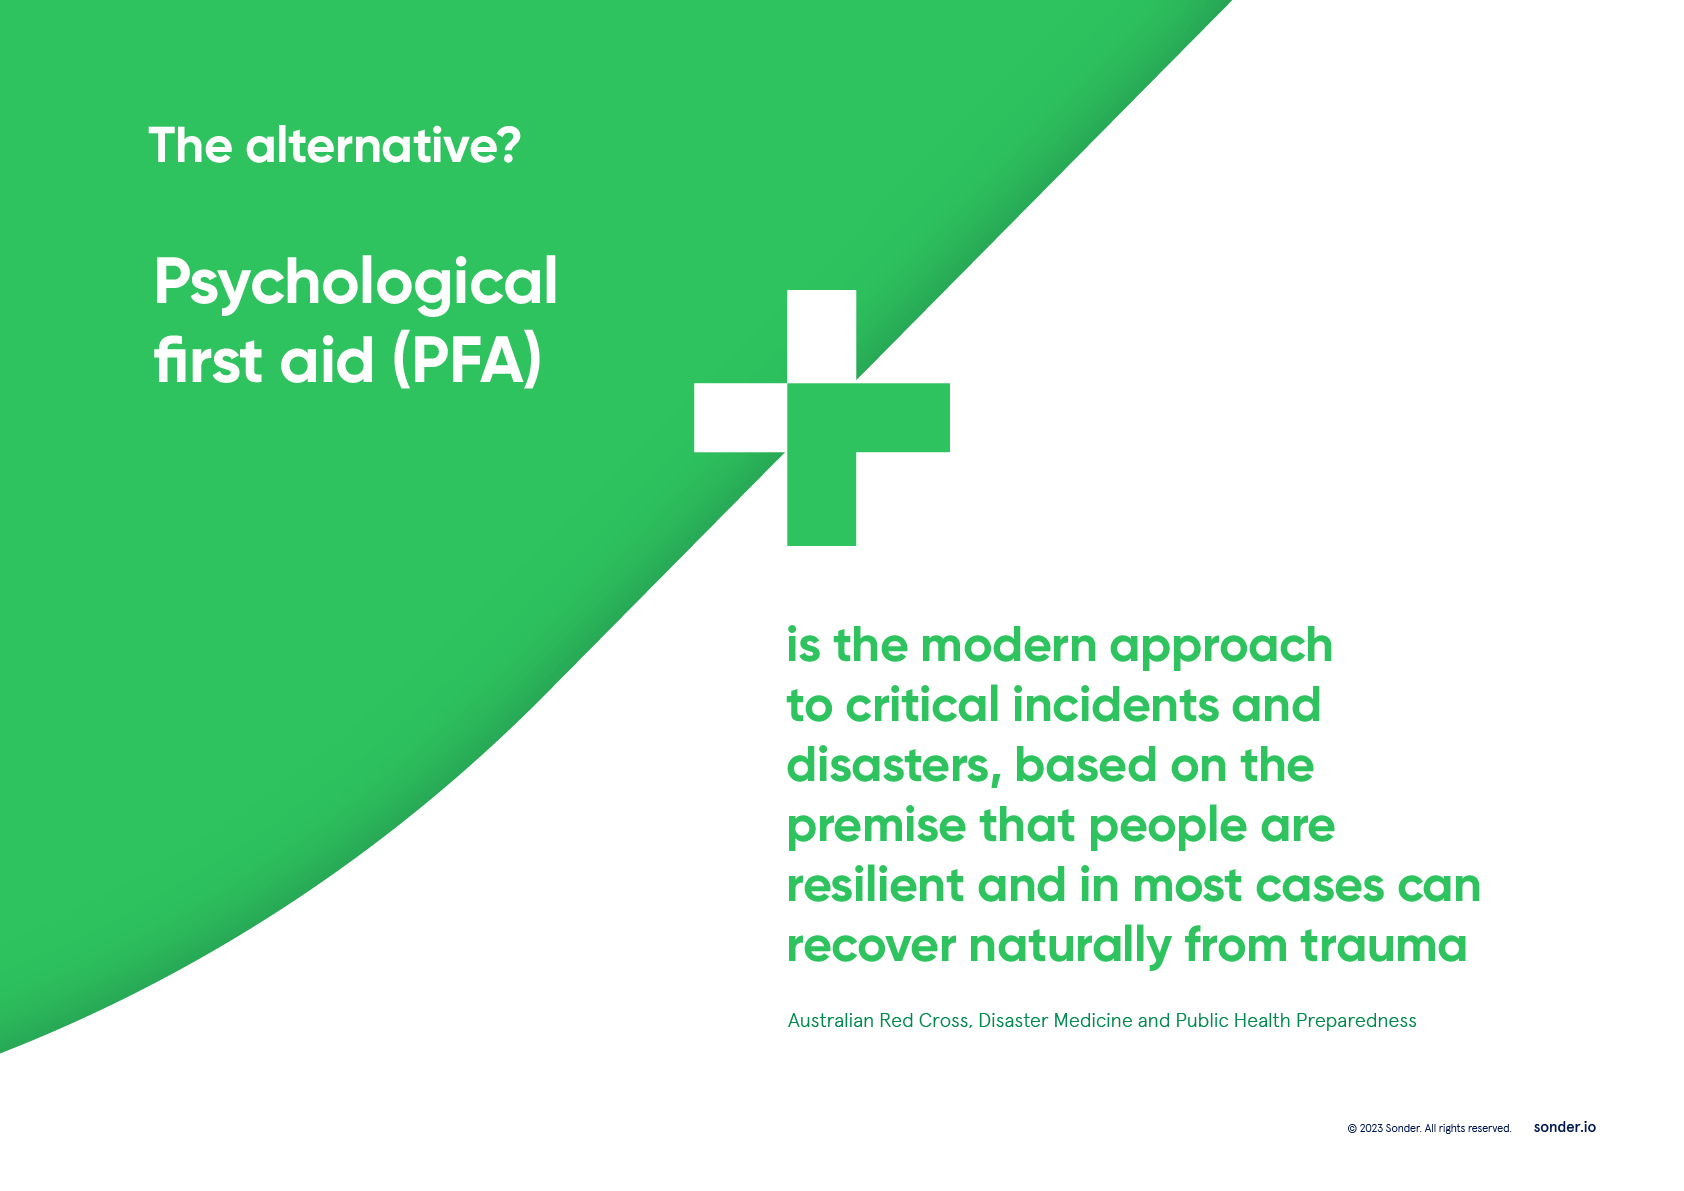 Psychological first aid (PFA) is the modern approach to critical incidents and disasters, based on the premise that people are resilient.